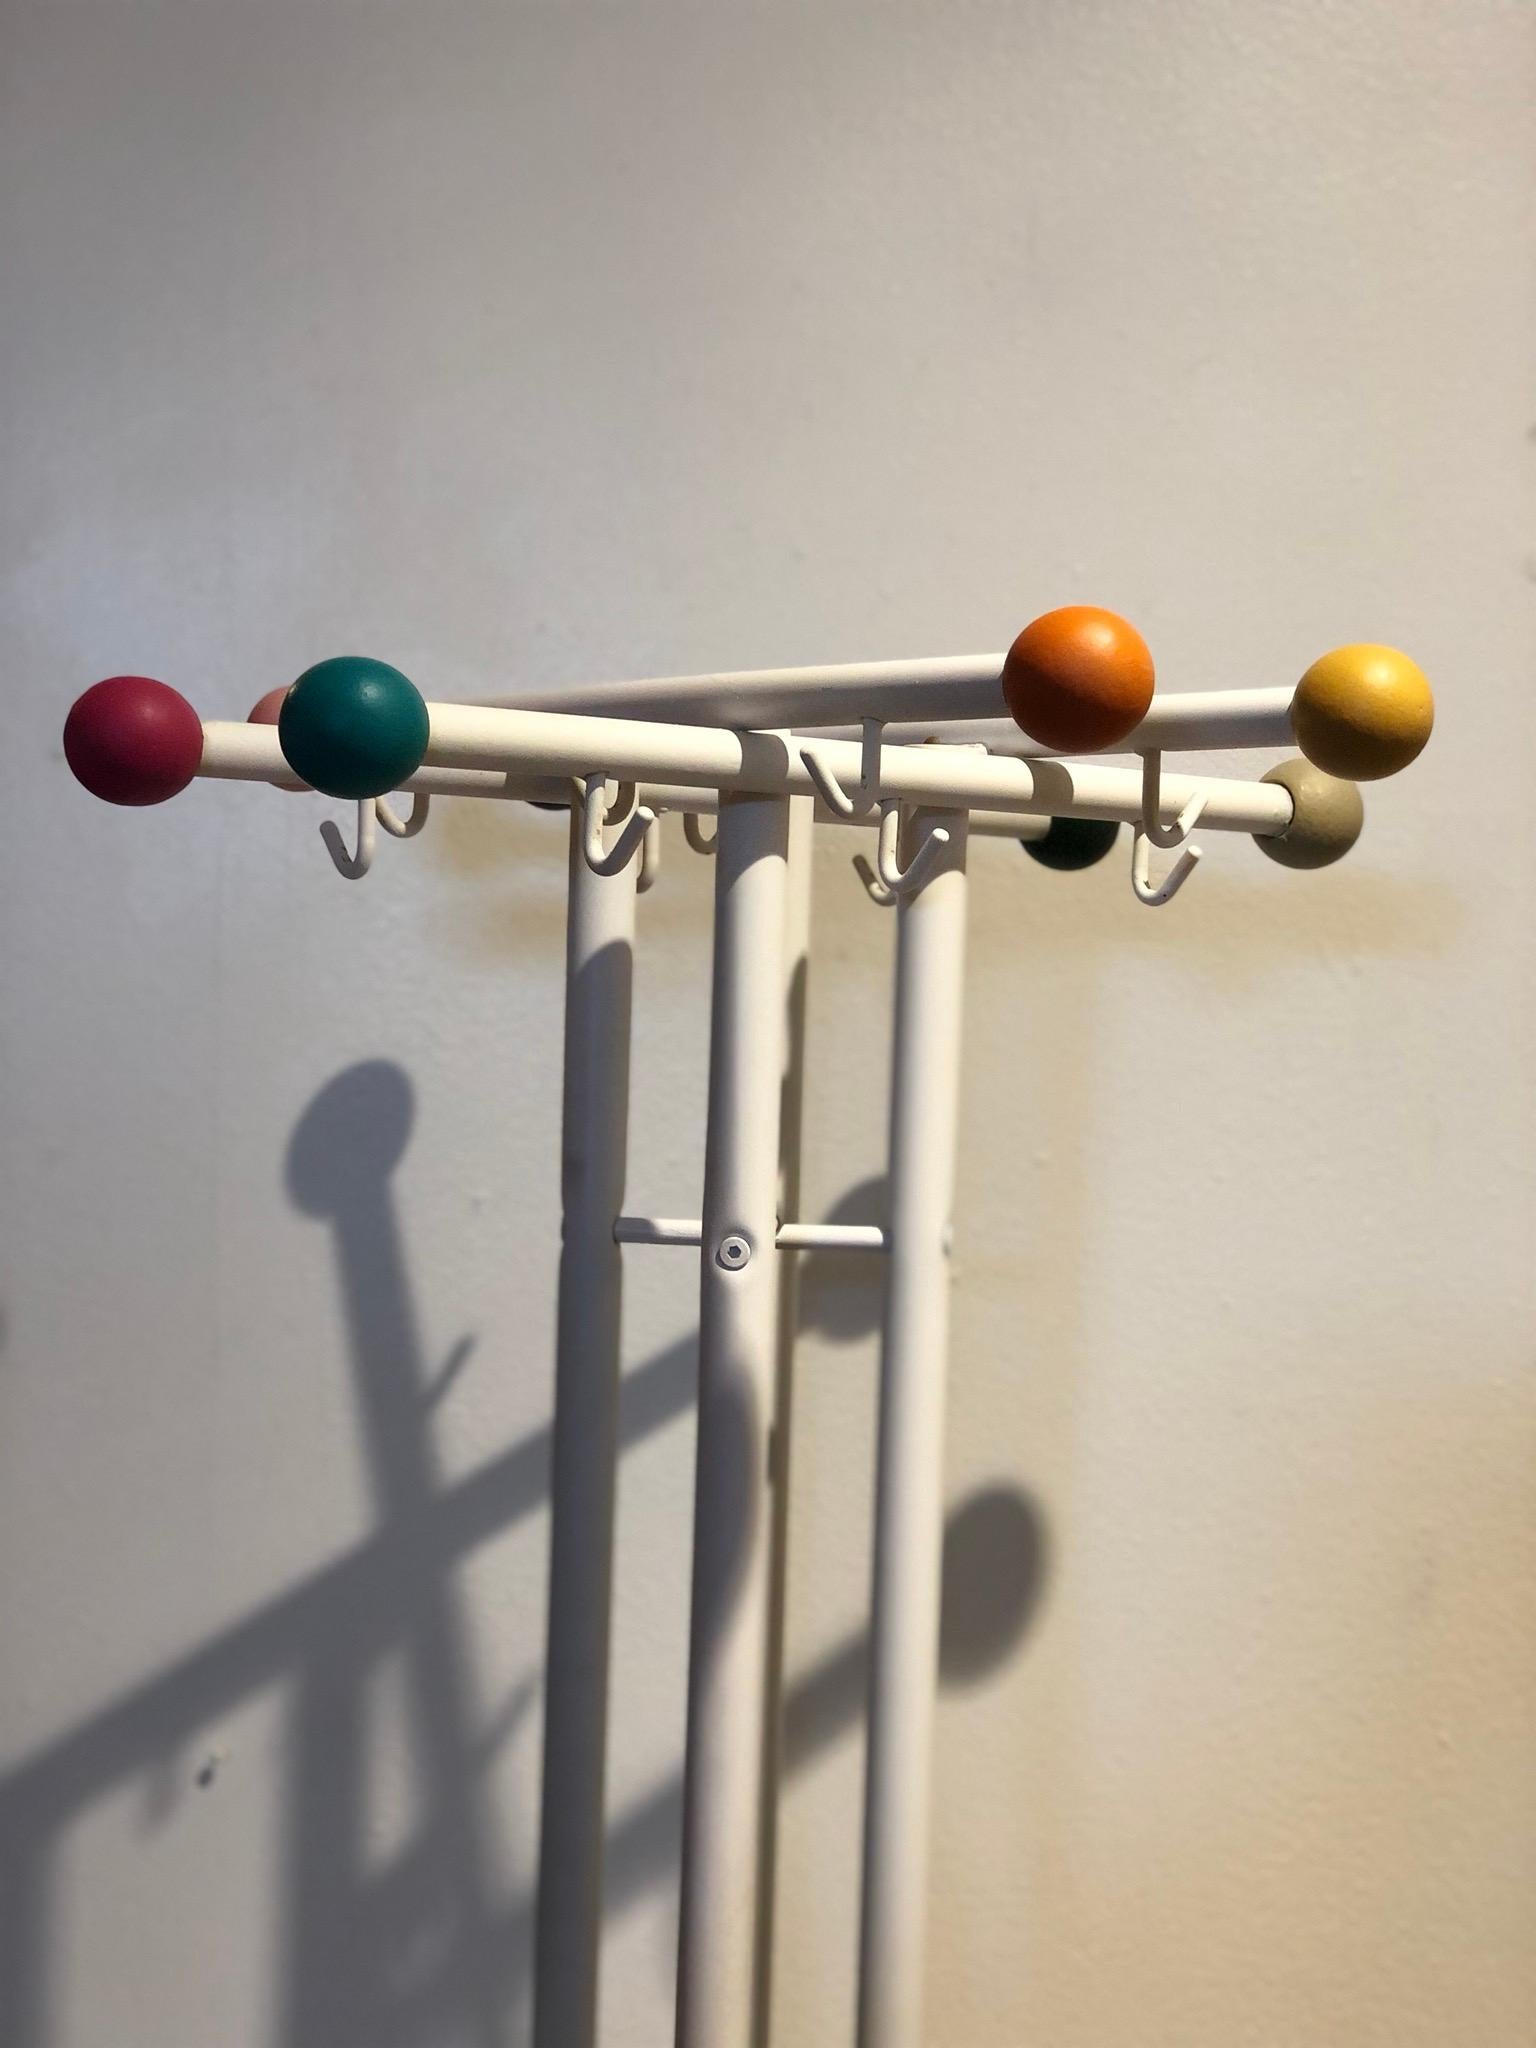 Very cool and simple design on this white metal pipping, and color wood painted balls circa 1980s good condition. I the style of Eames Designs.